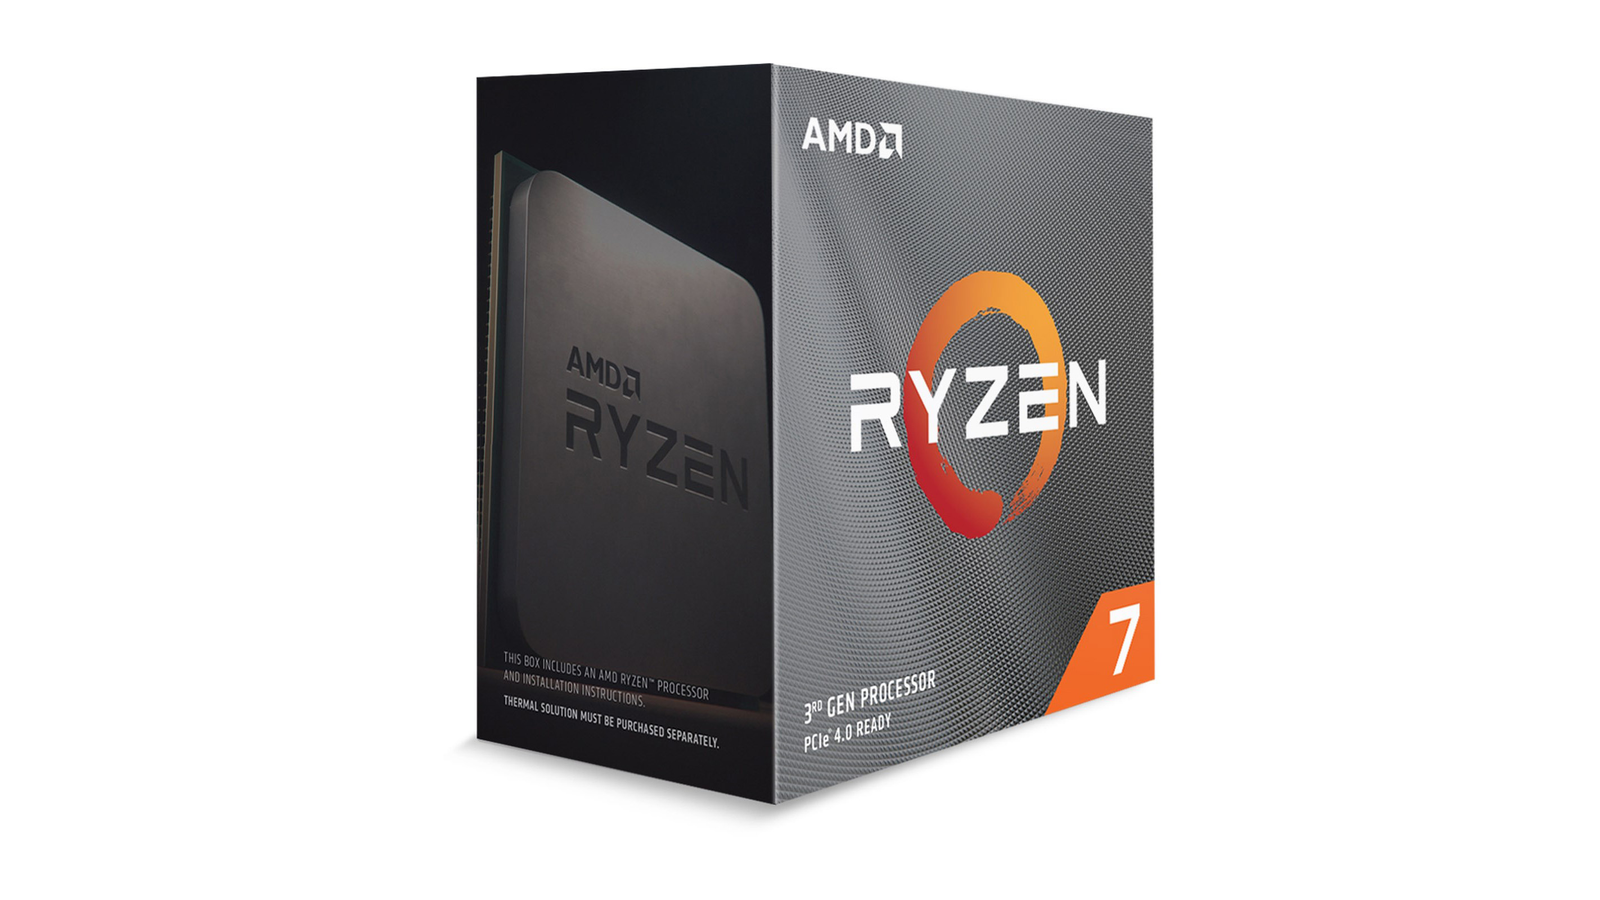 AMD's Ryzen 7 5700X is down to £185 at  UK - a great CPU deal